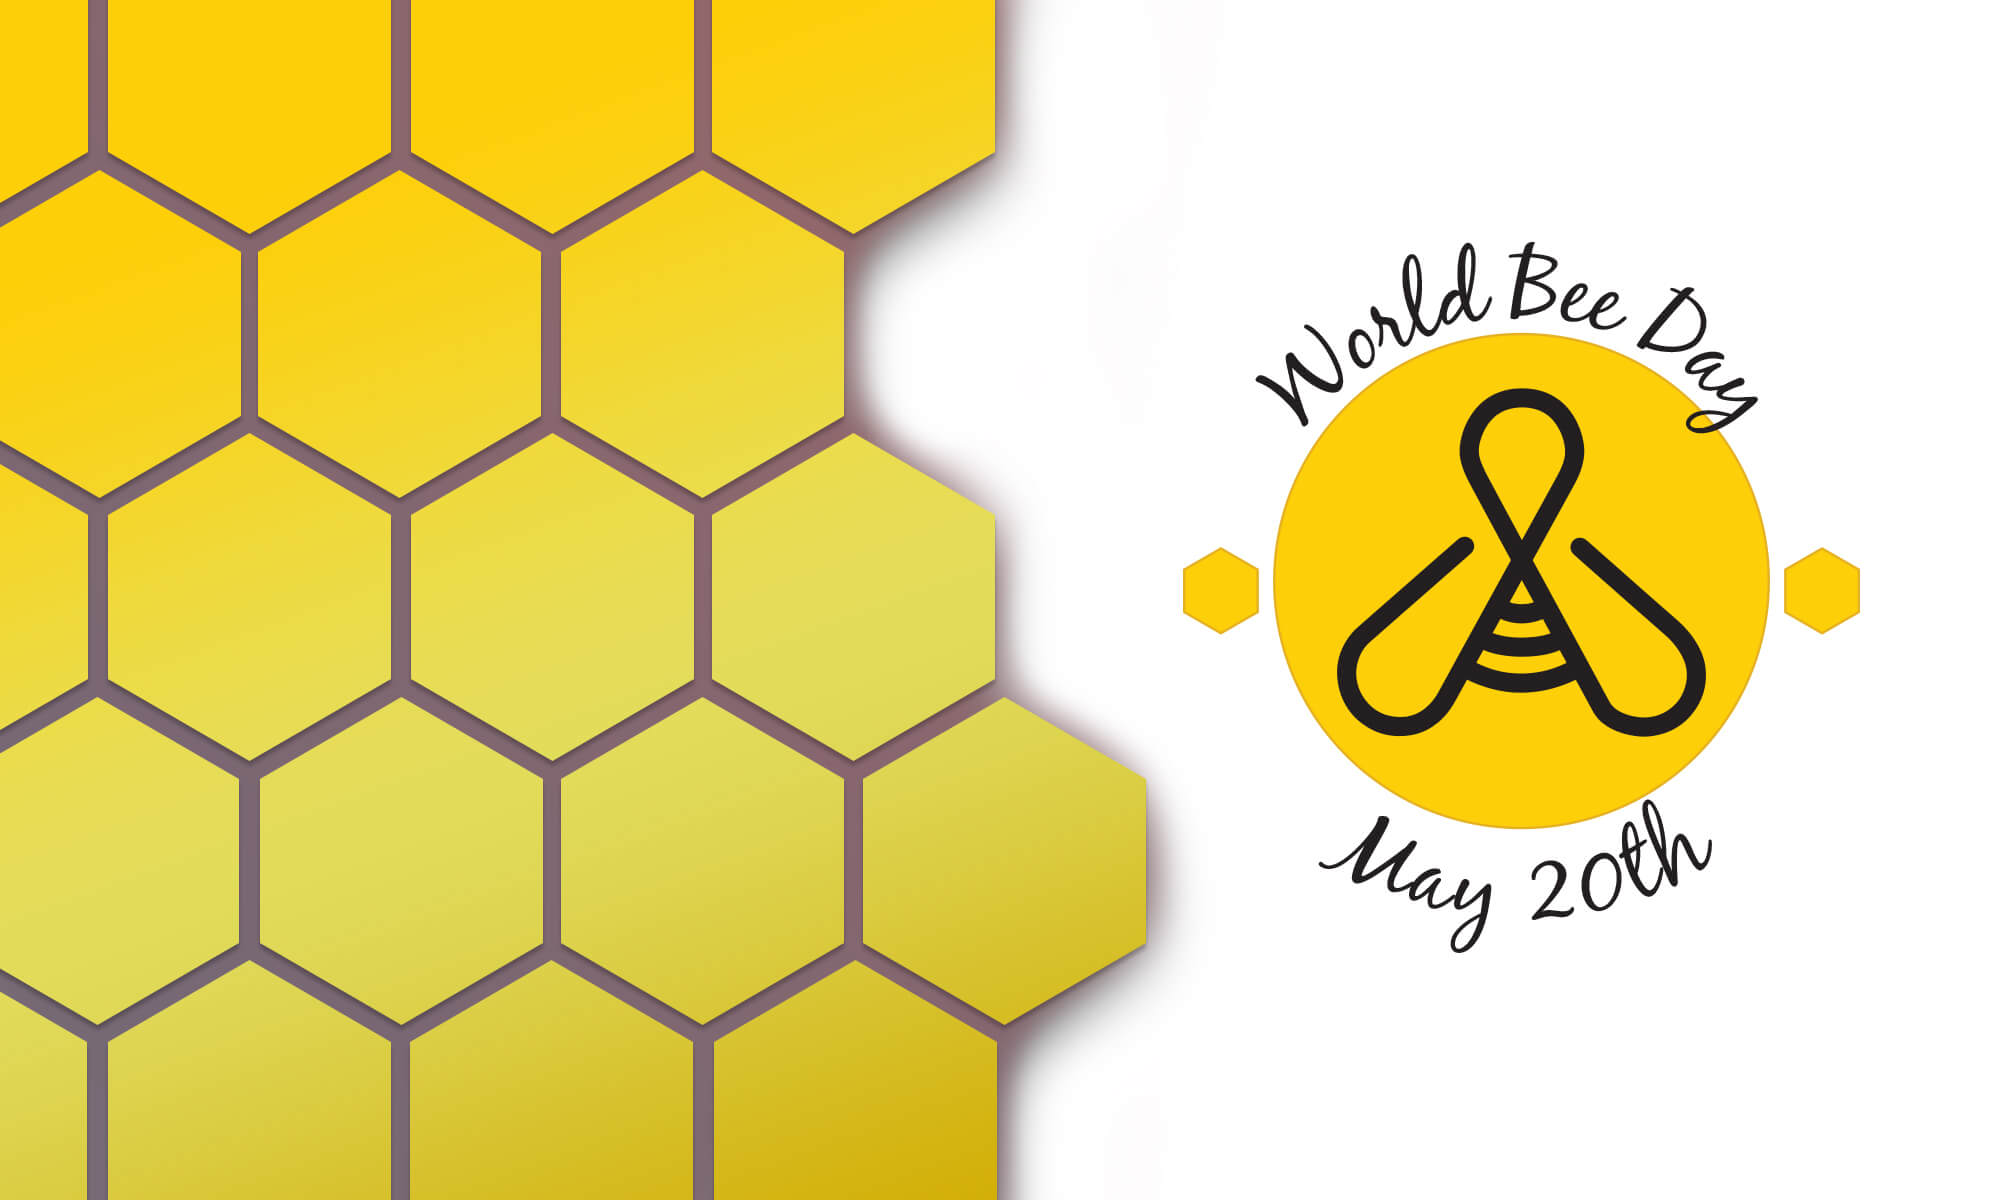 World Bee Day observed globally on 20th May_50.1